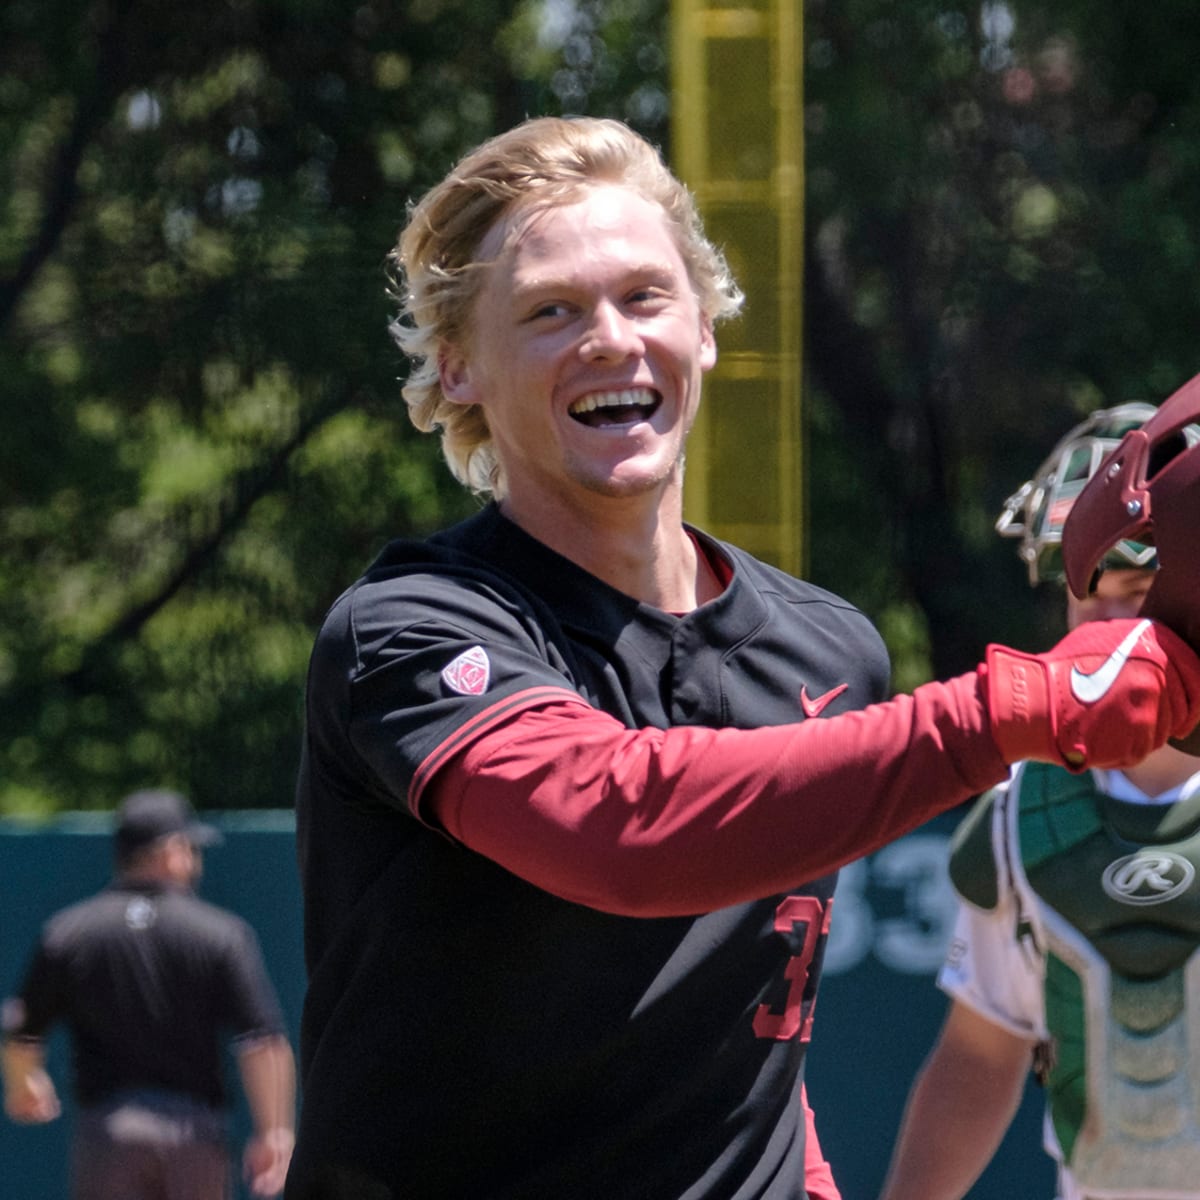 Kyle Stowers: Orioles pick Stanford OF in MLB draft (video